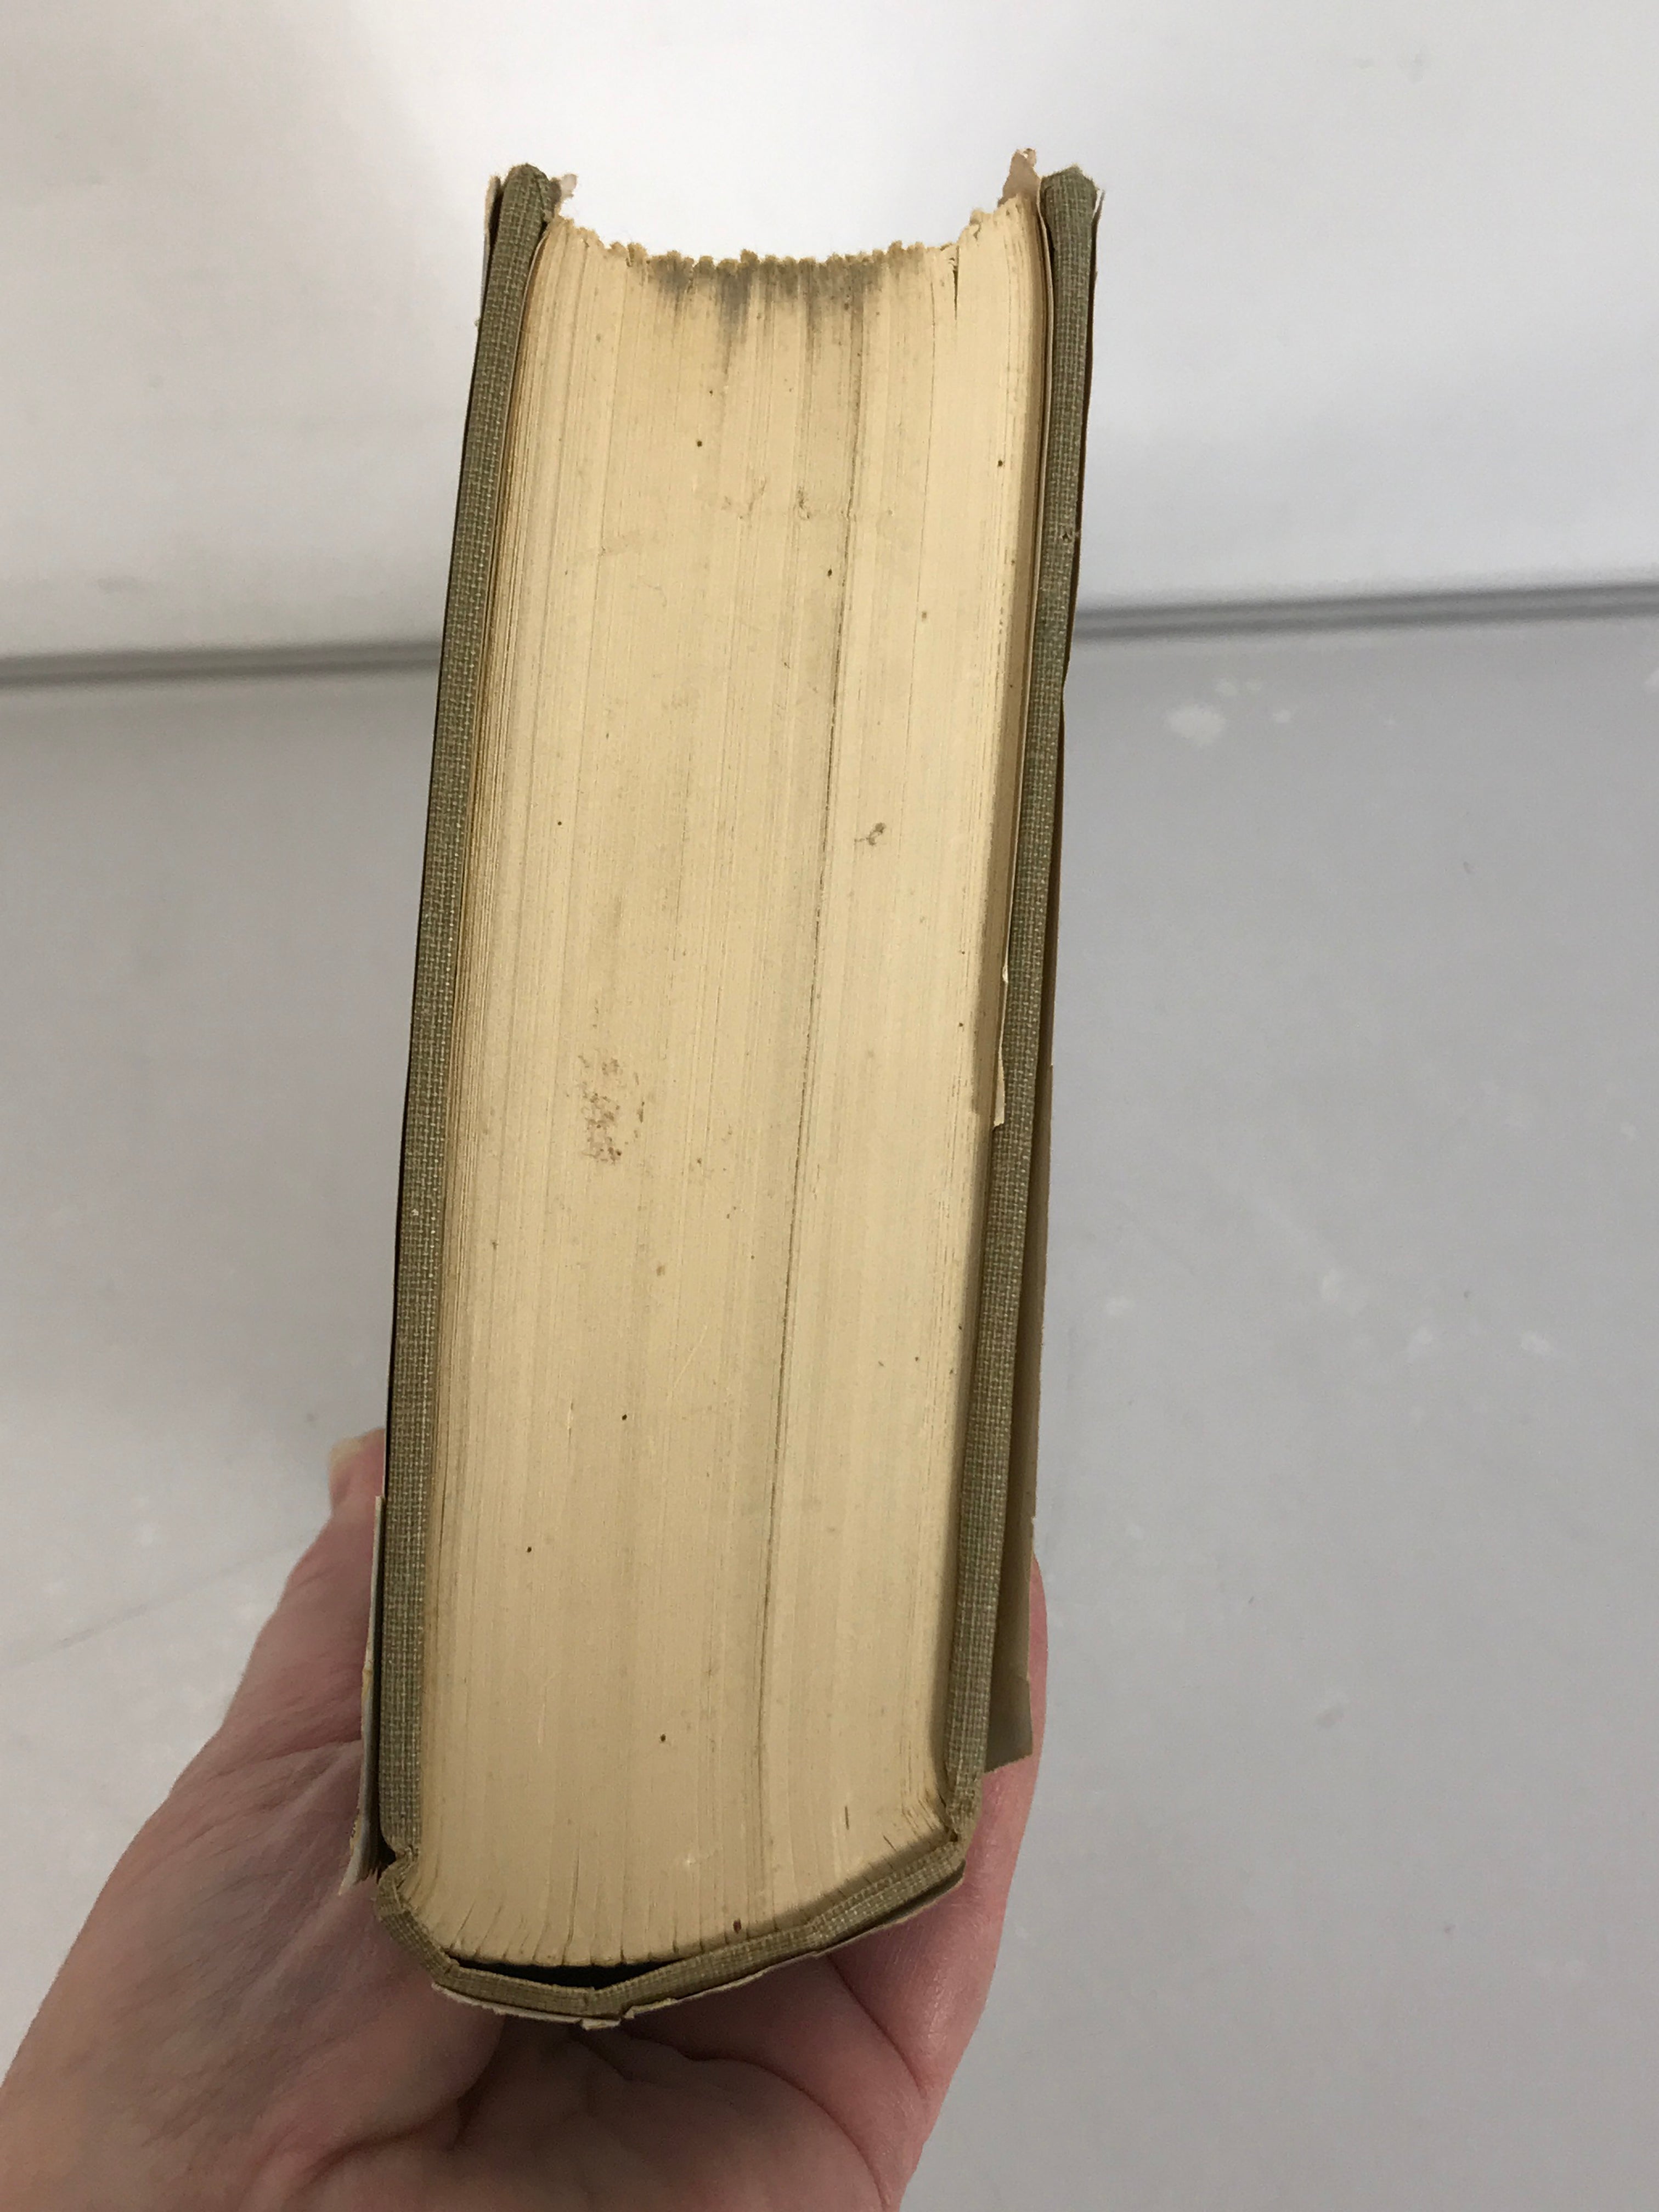 A Treasury of Science by Shapley, Rapport, and Wright 1954 HC DJ Vintage